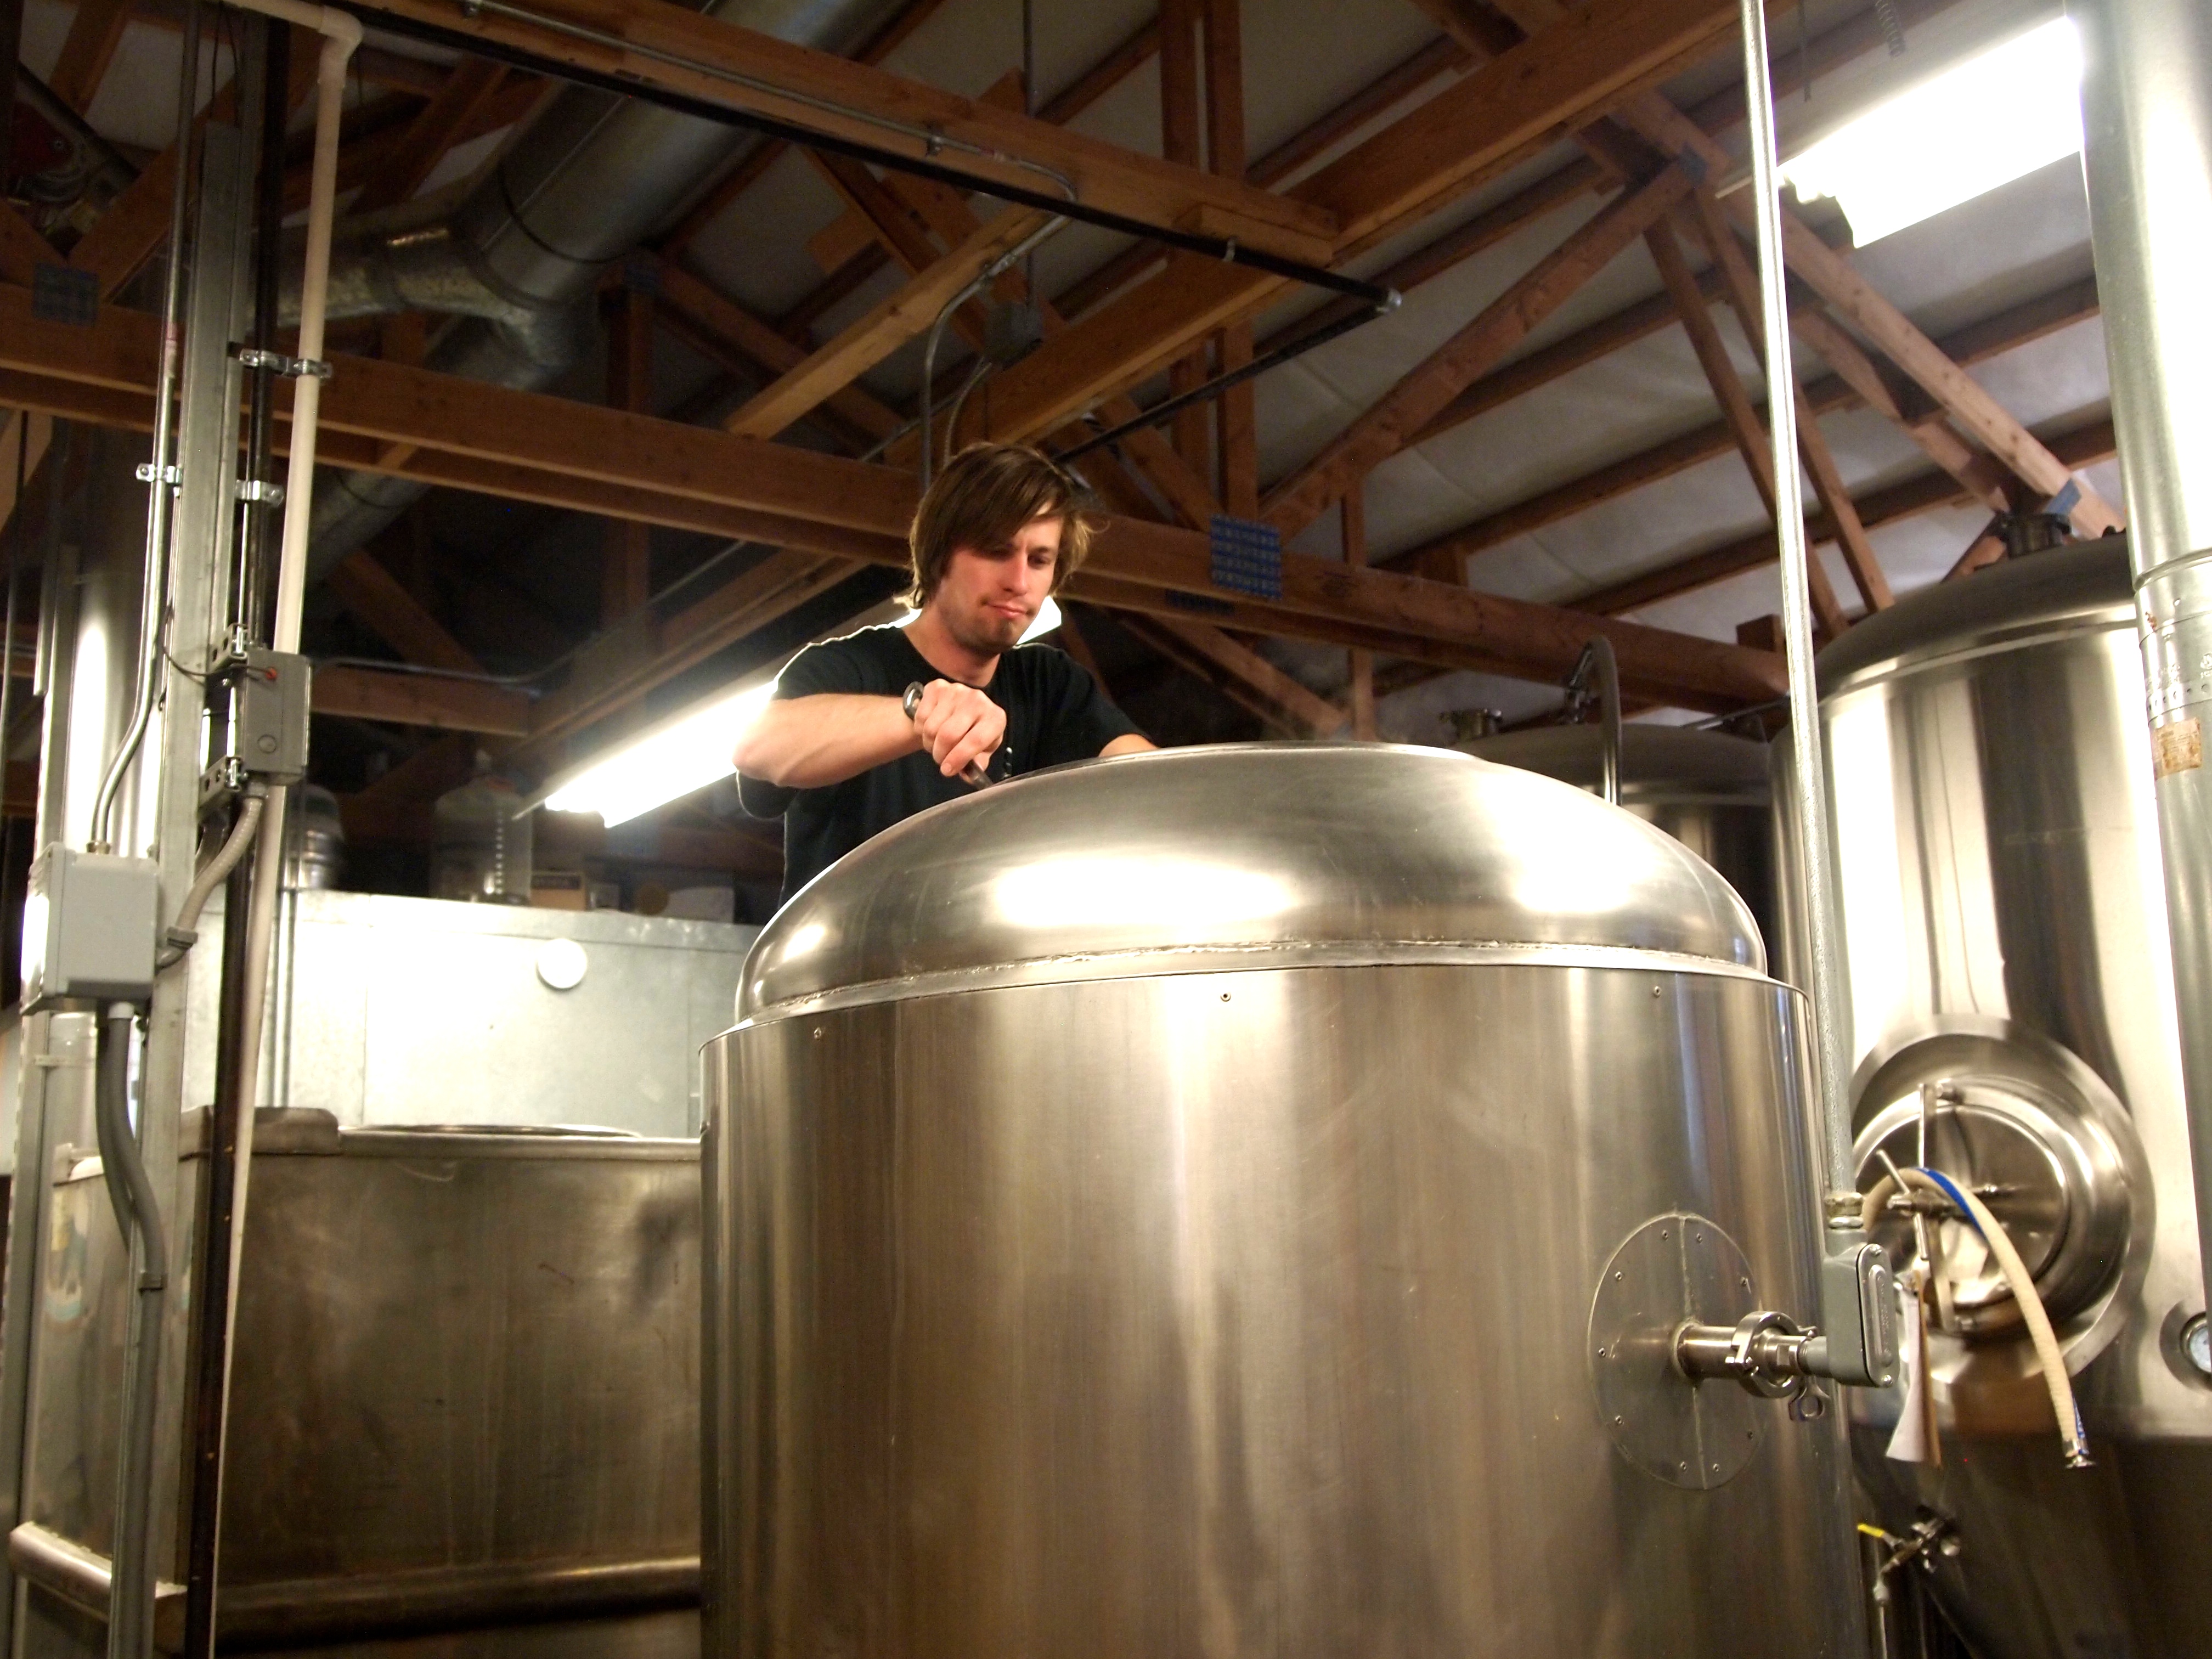 Brewmaster Nate creating the goodness.